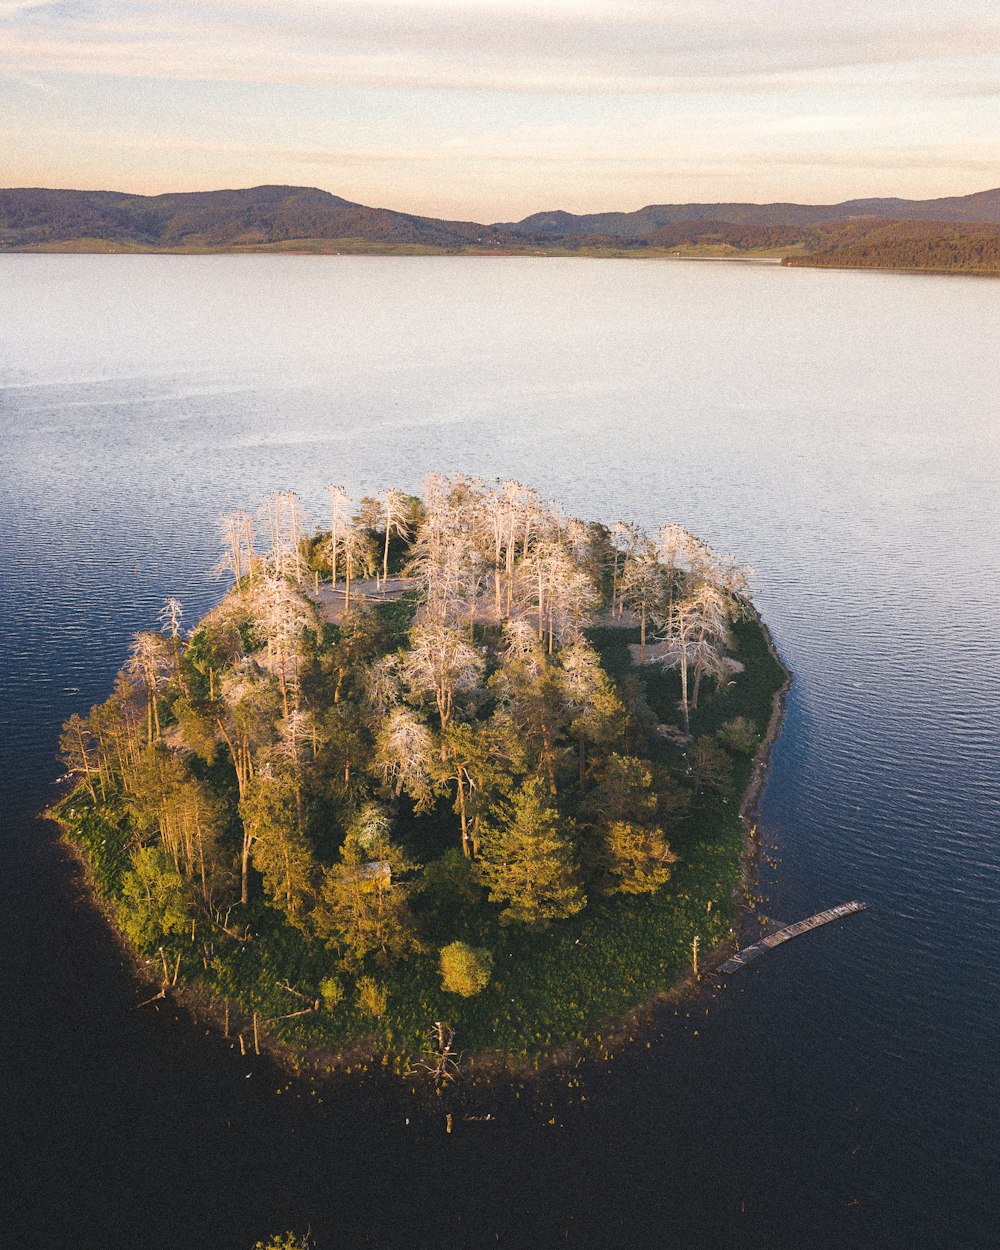 a small island in the middle of a lake